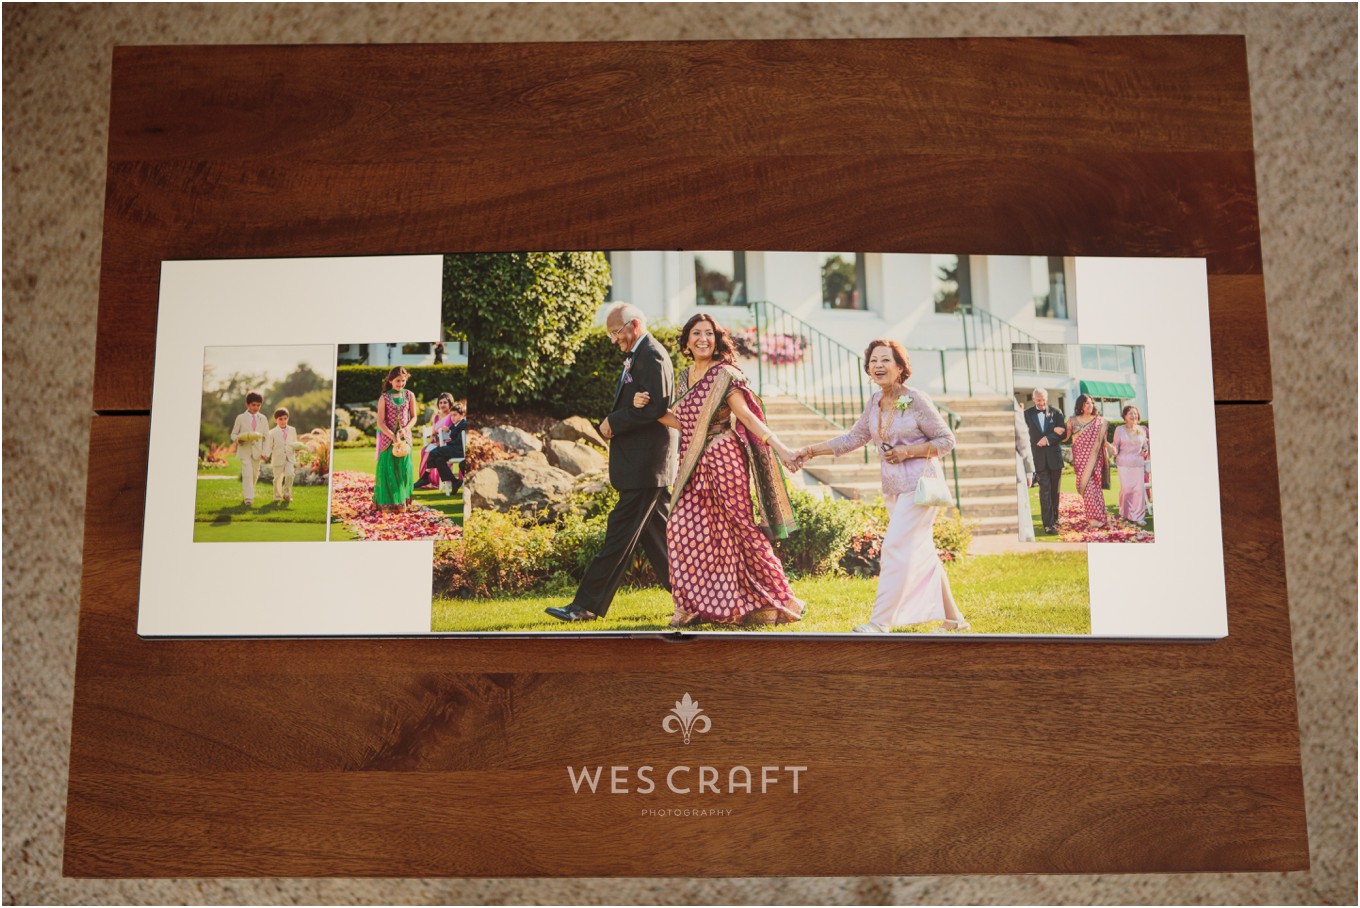 We love this album spread from the wedding ceremony.  Our Artisan 16x12 album comes with 25 spreads!